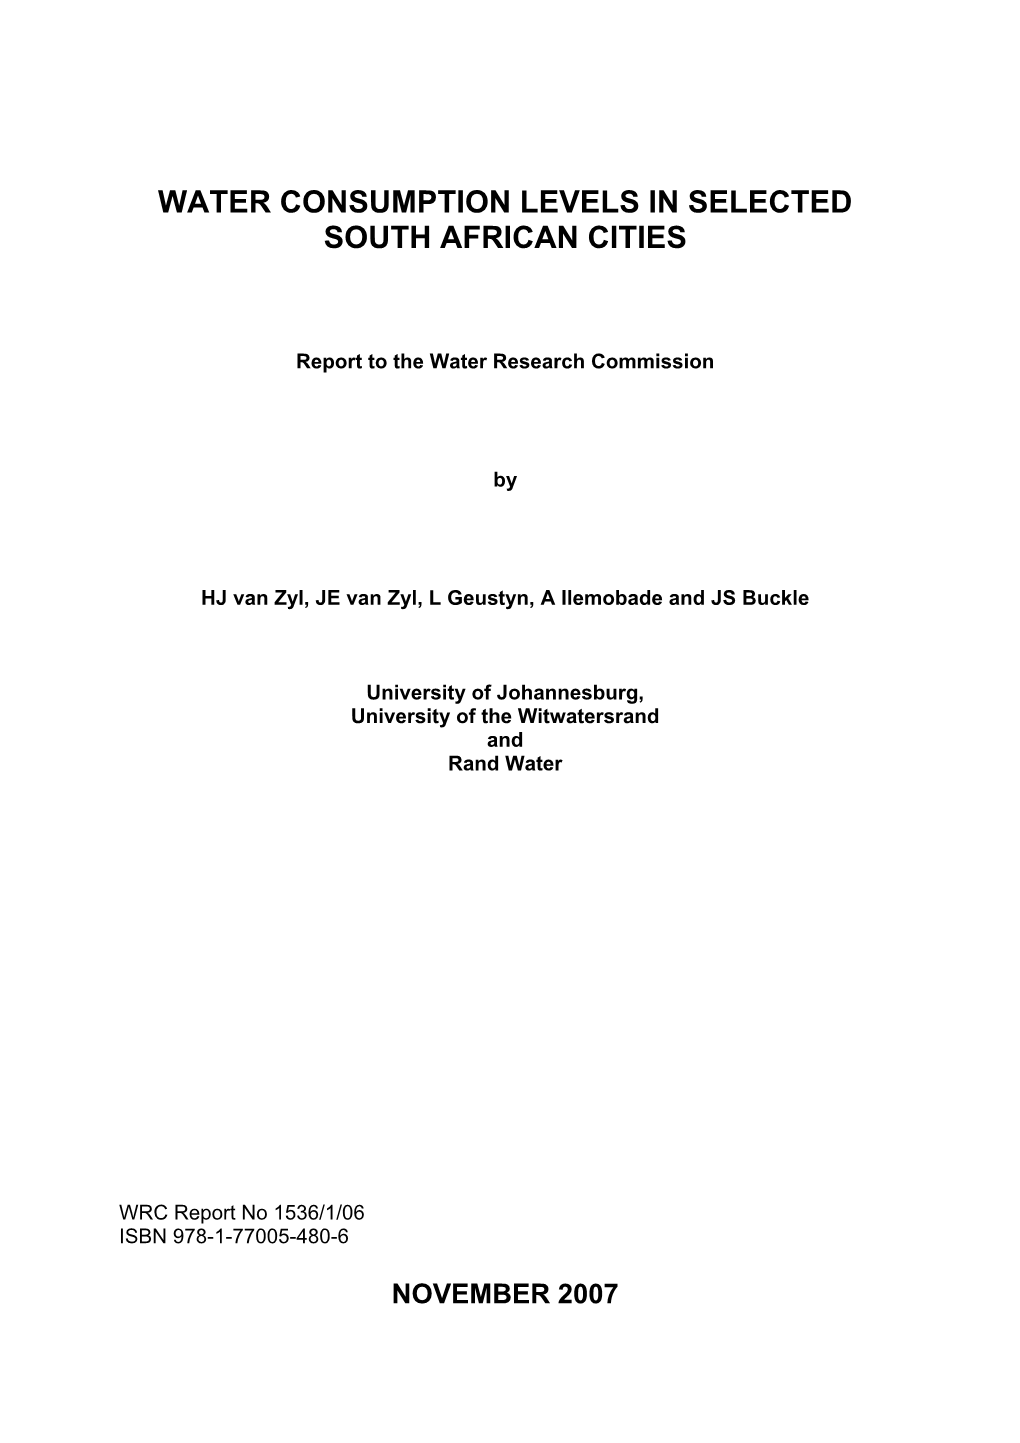 Water Consumption Levels in Selected South African Cities